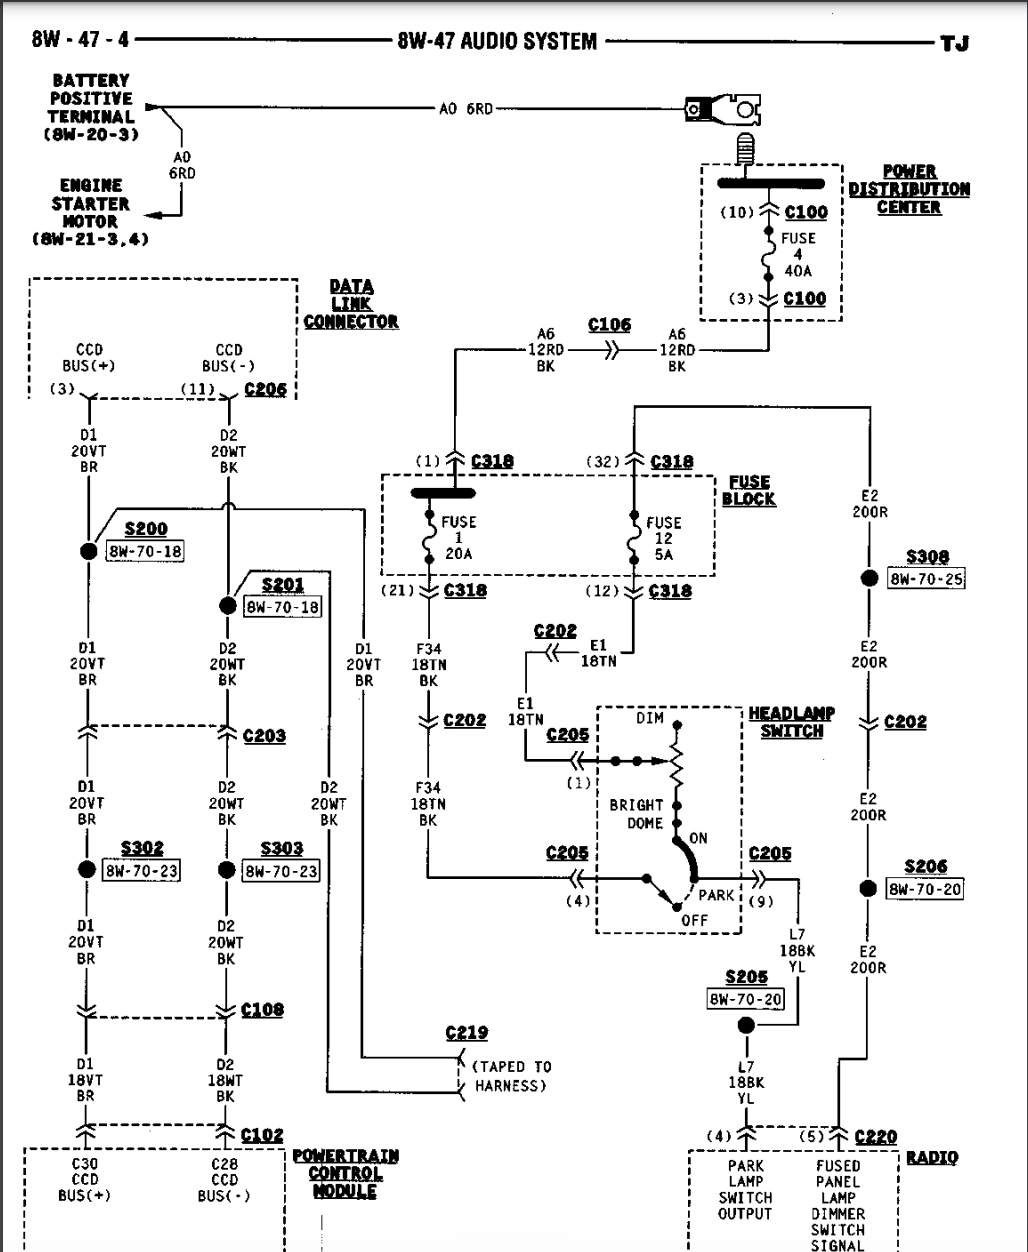 97 T J stereo wiring questions | Jeep Wrangler TJ Forum